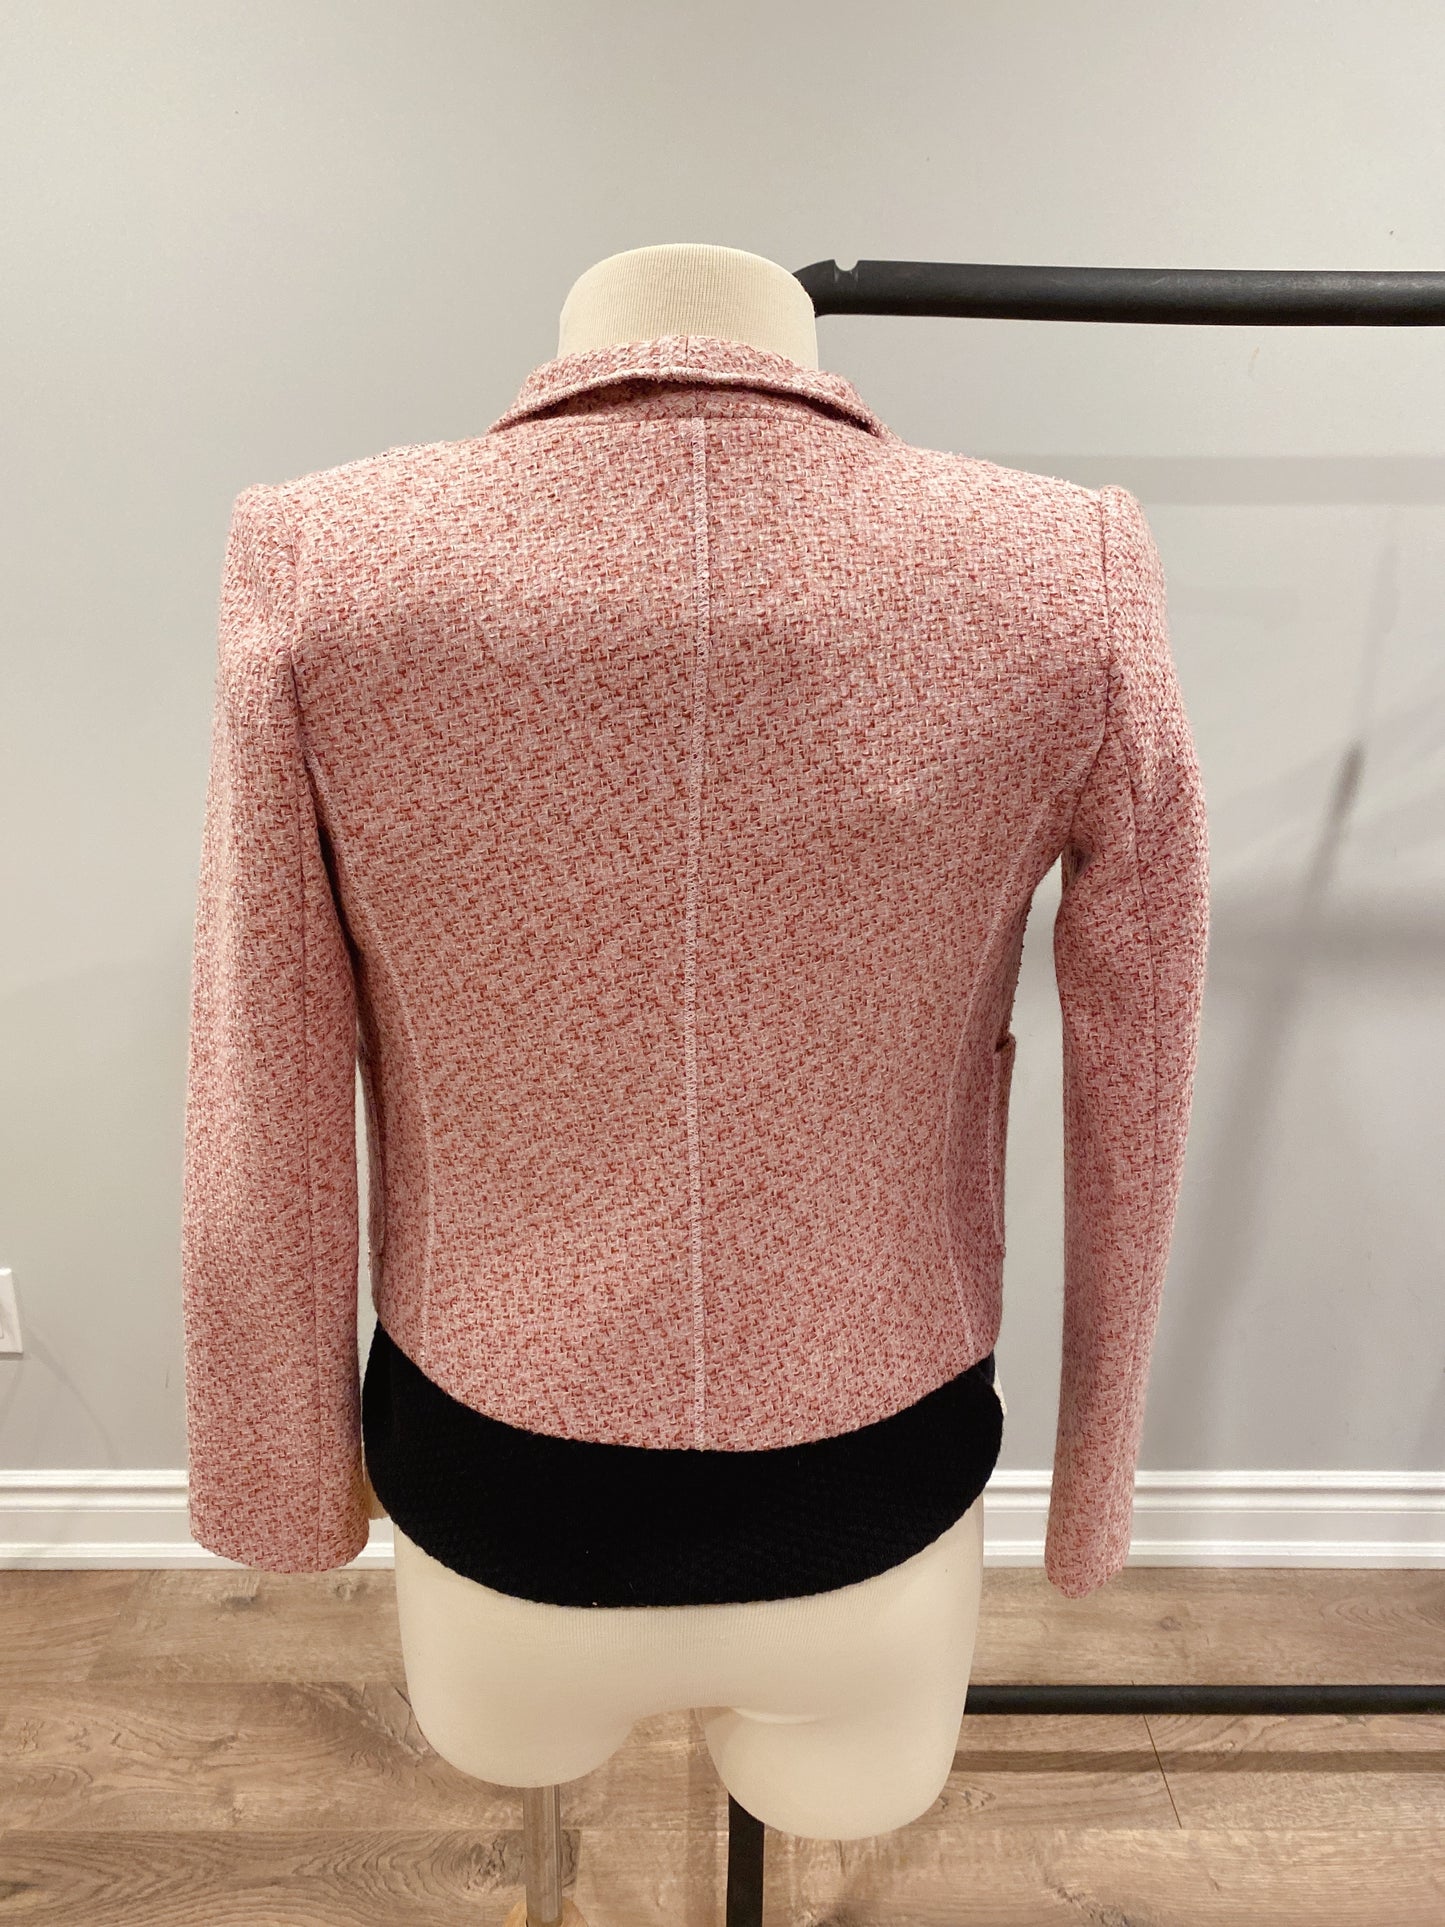 New Pink boucle tweed Chanel style peaked collar lined blazer